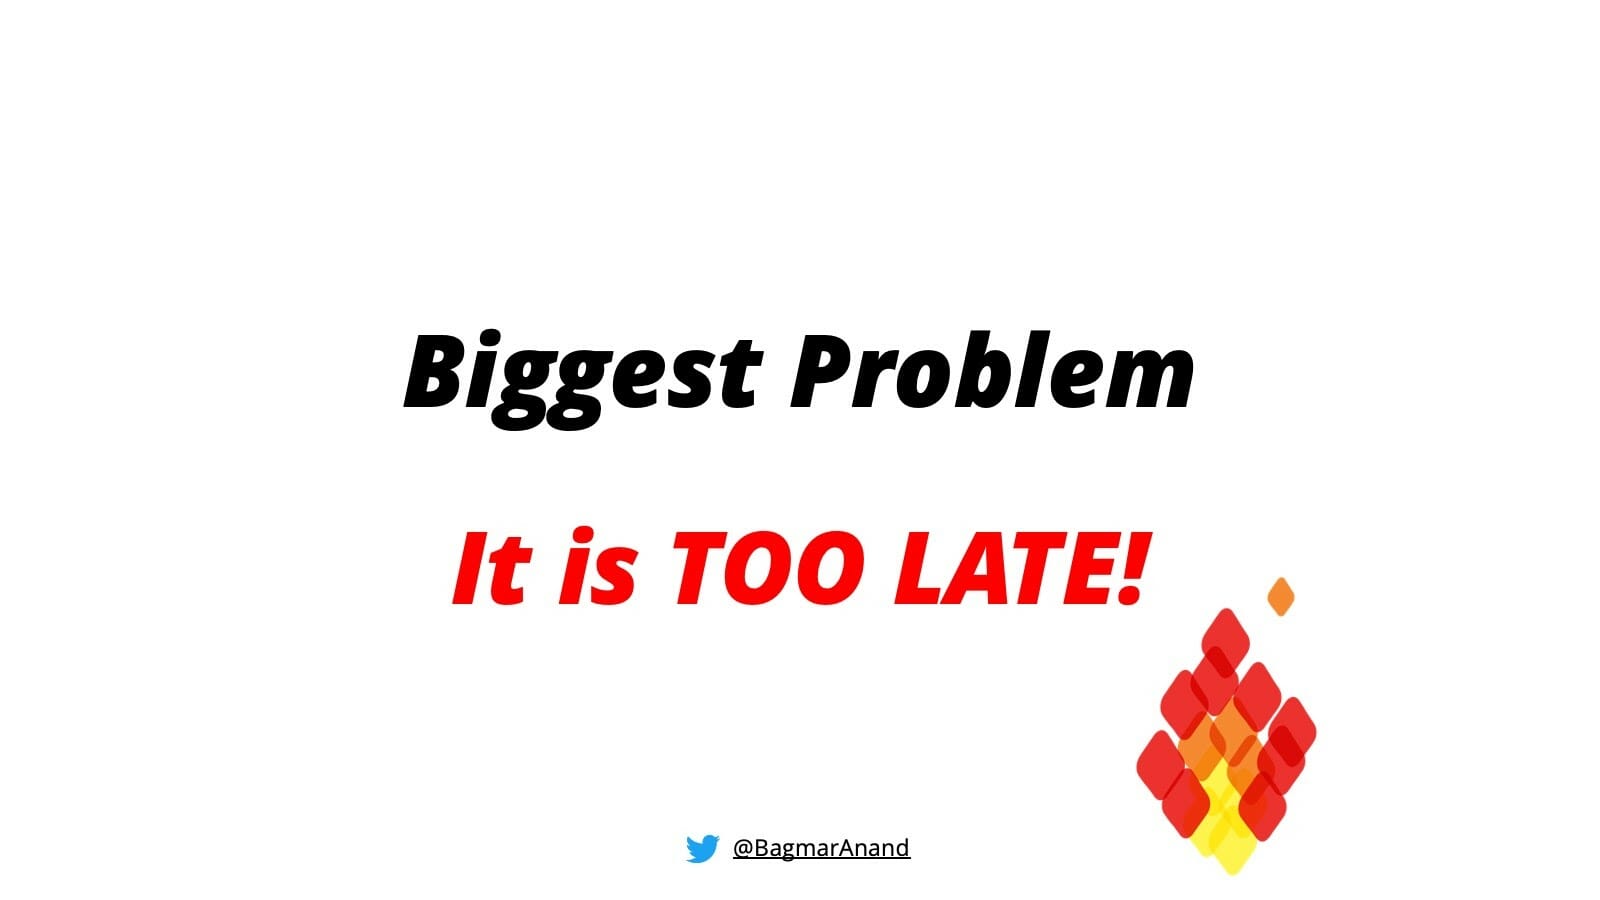 The biggest problem with testing the end report is that it's too late!